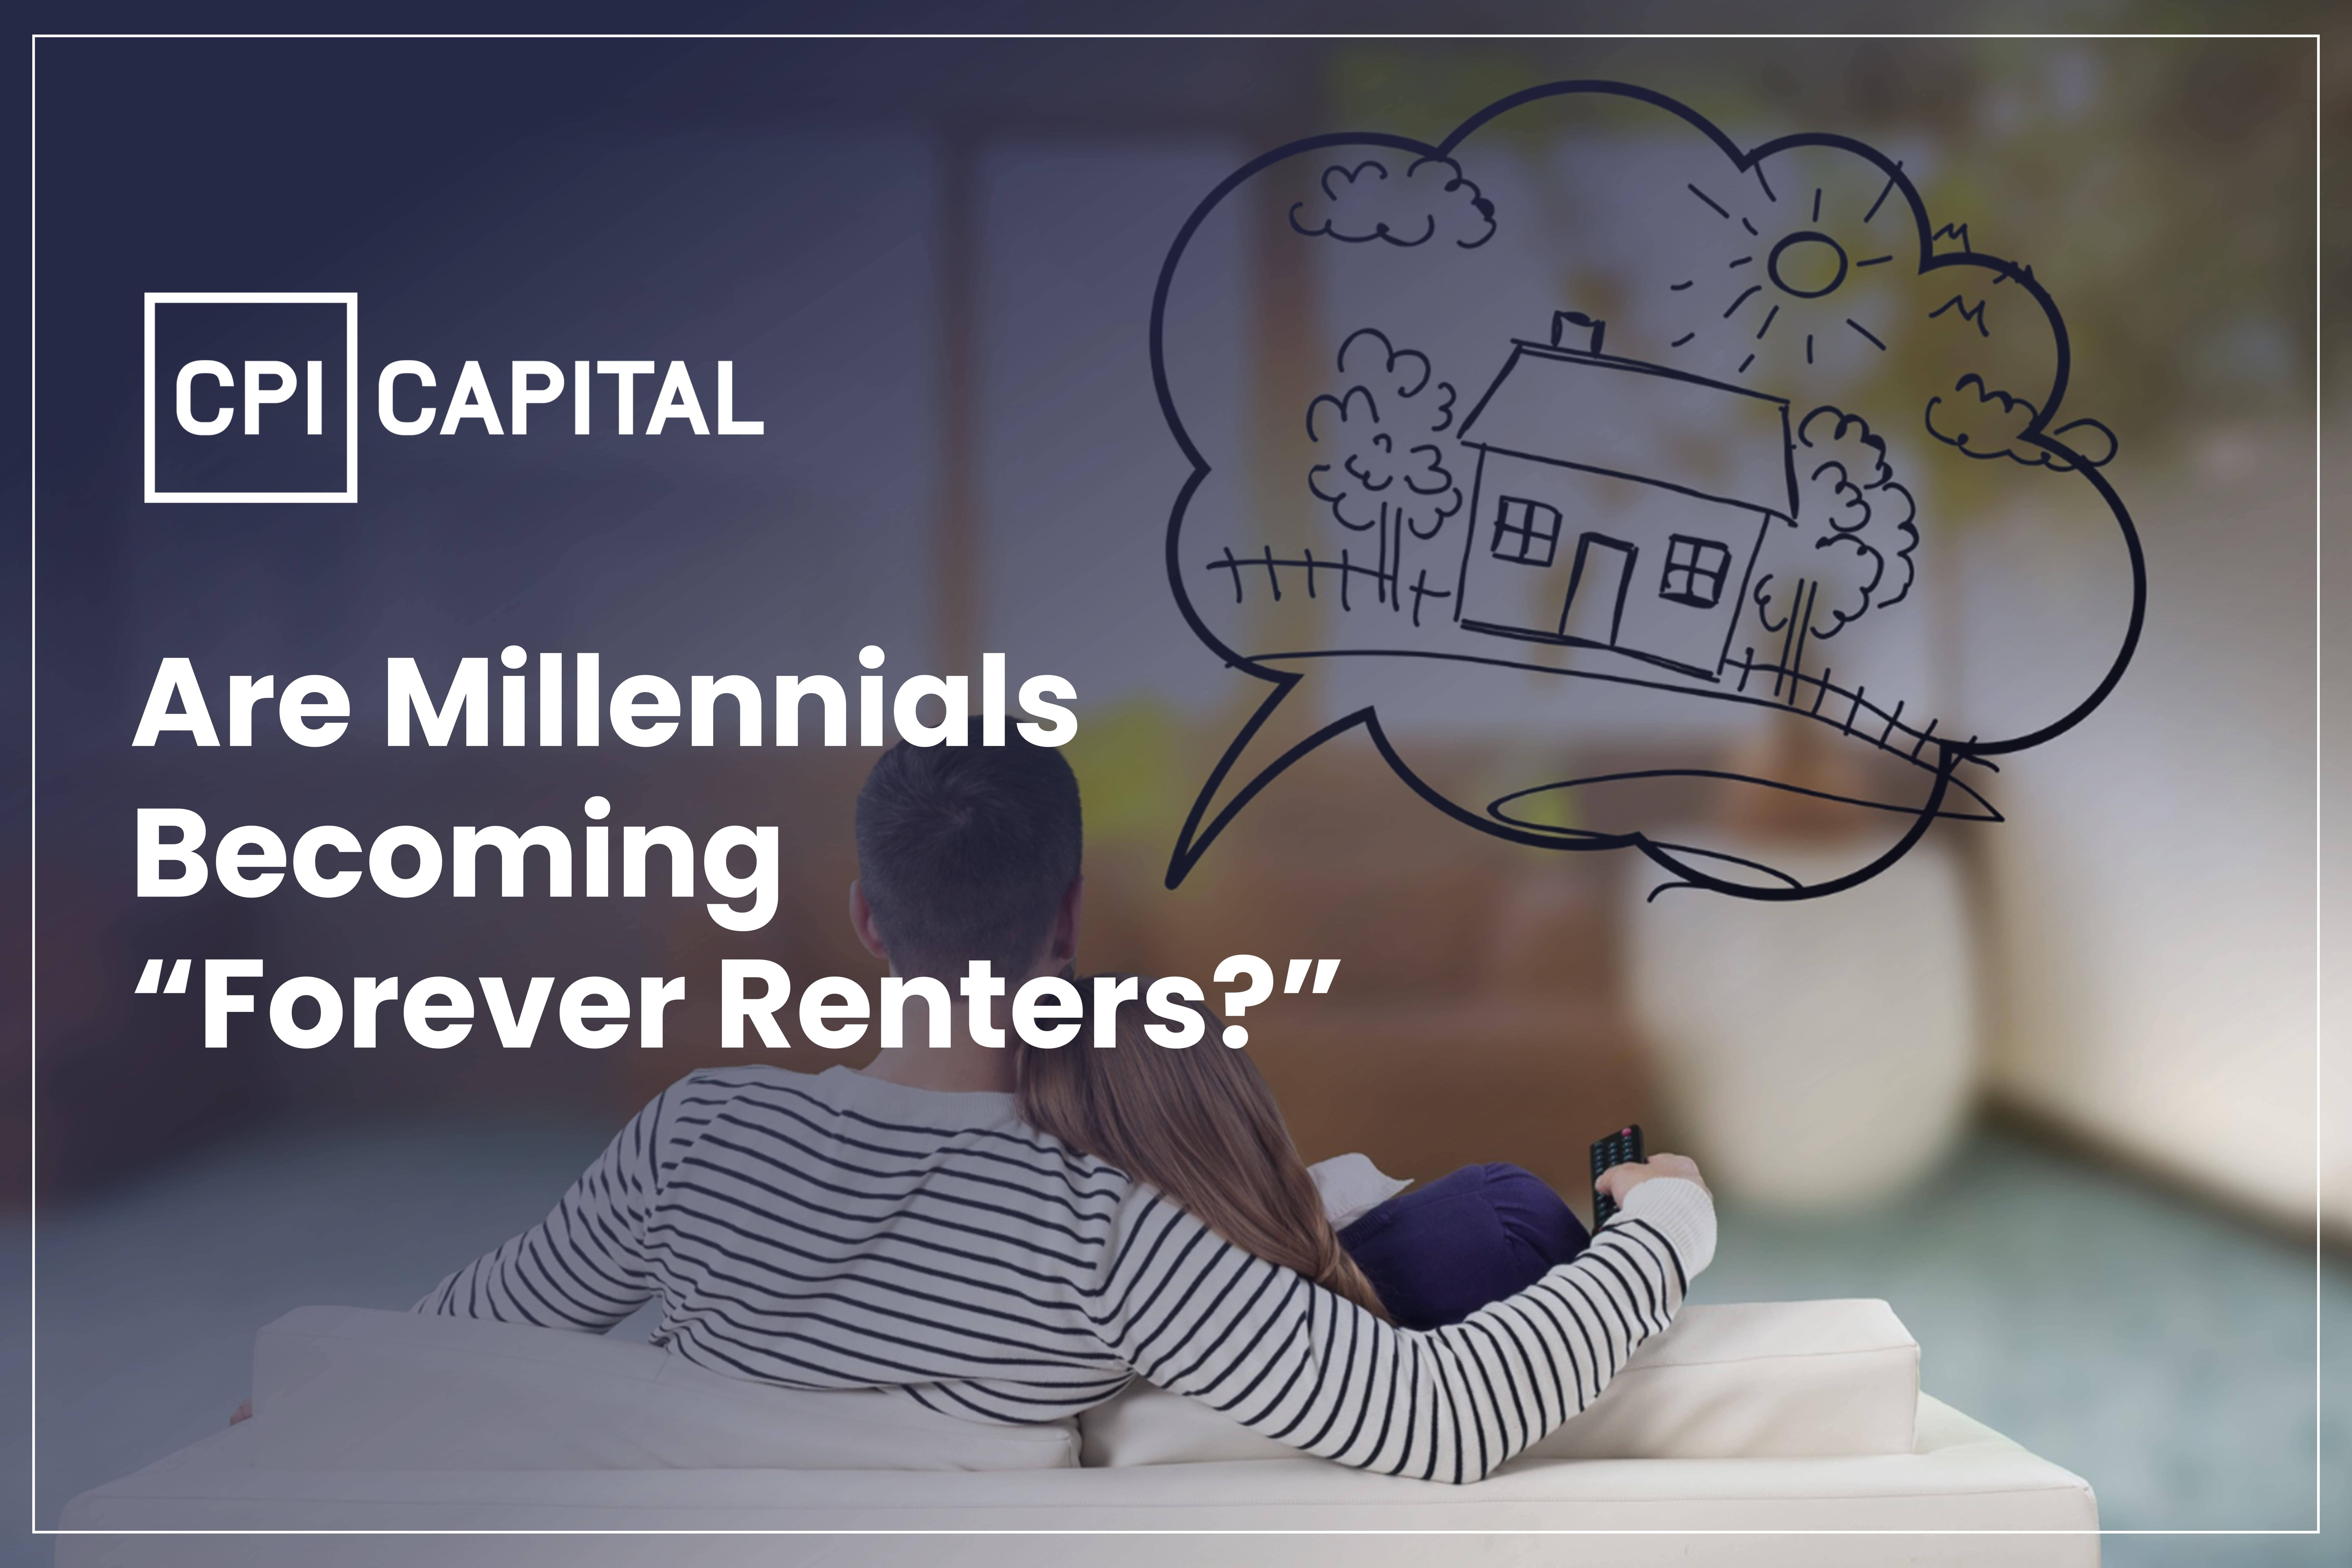 CPI capital_Are Millennials Becoming Forever Renters